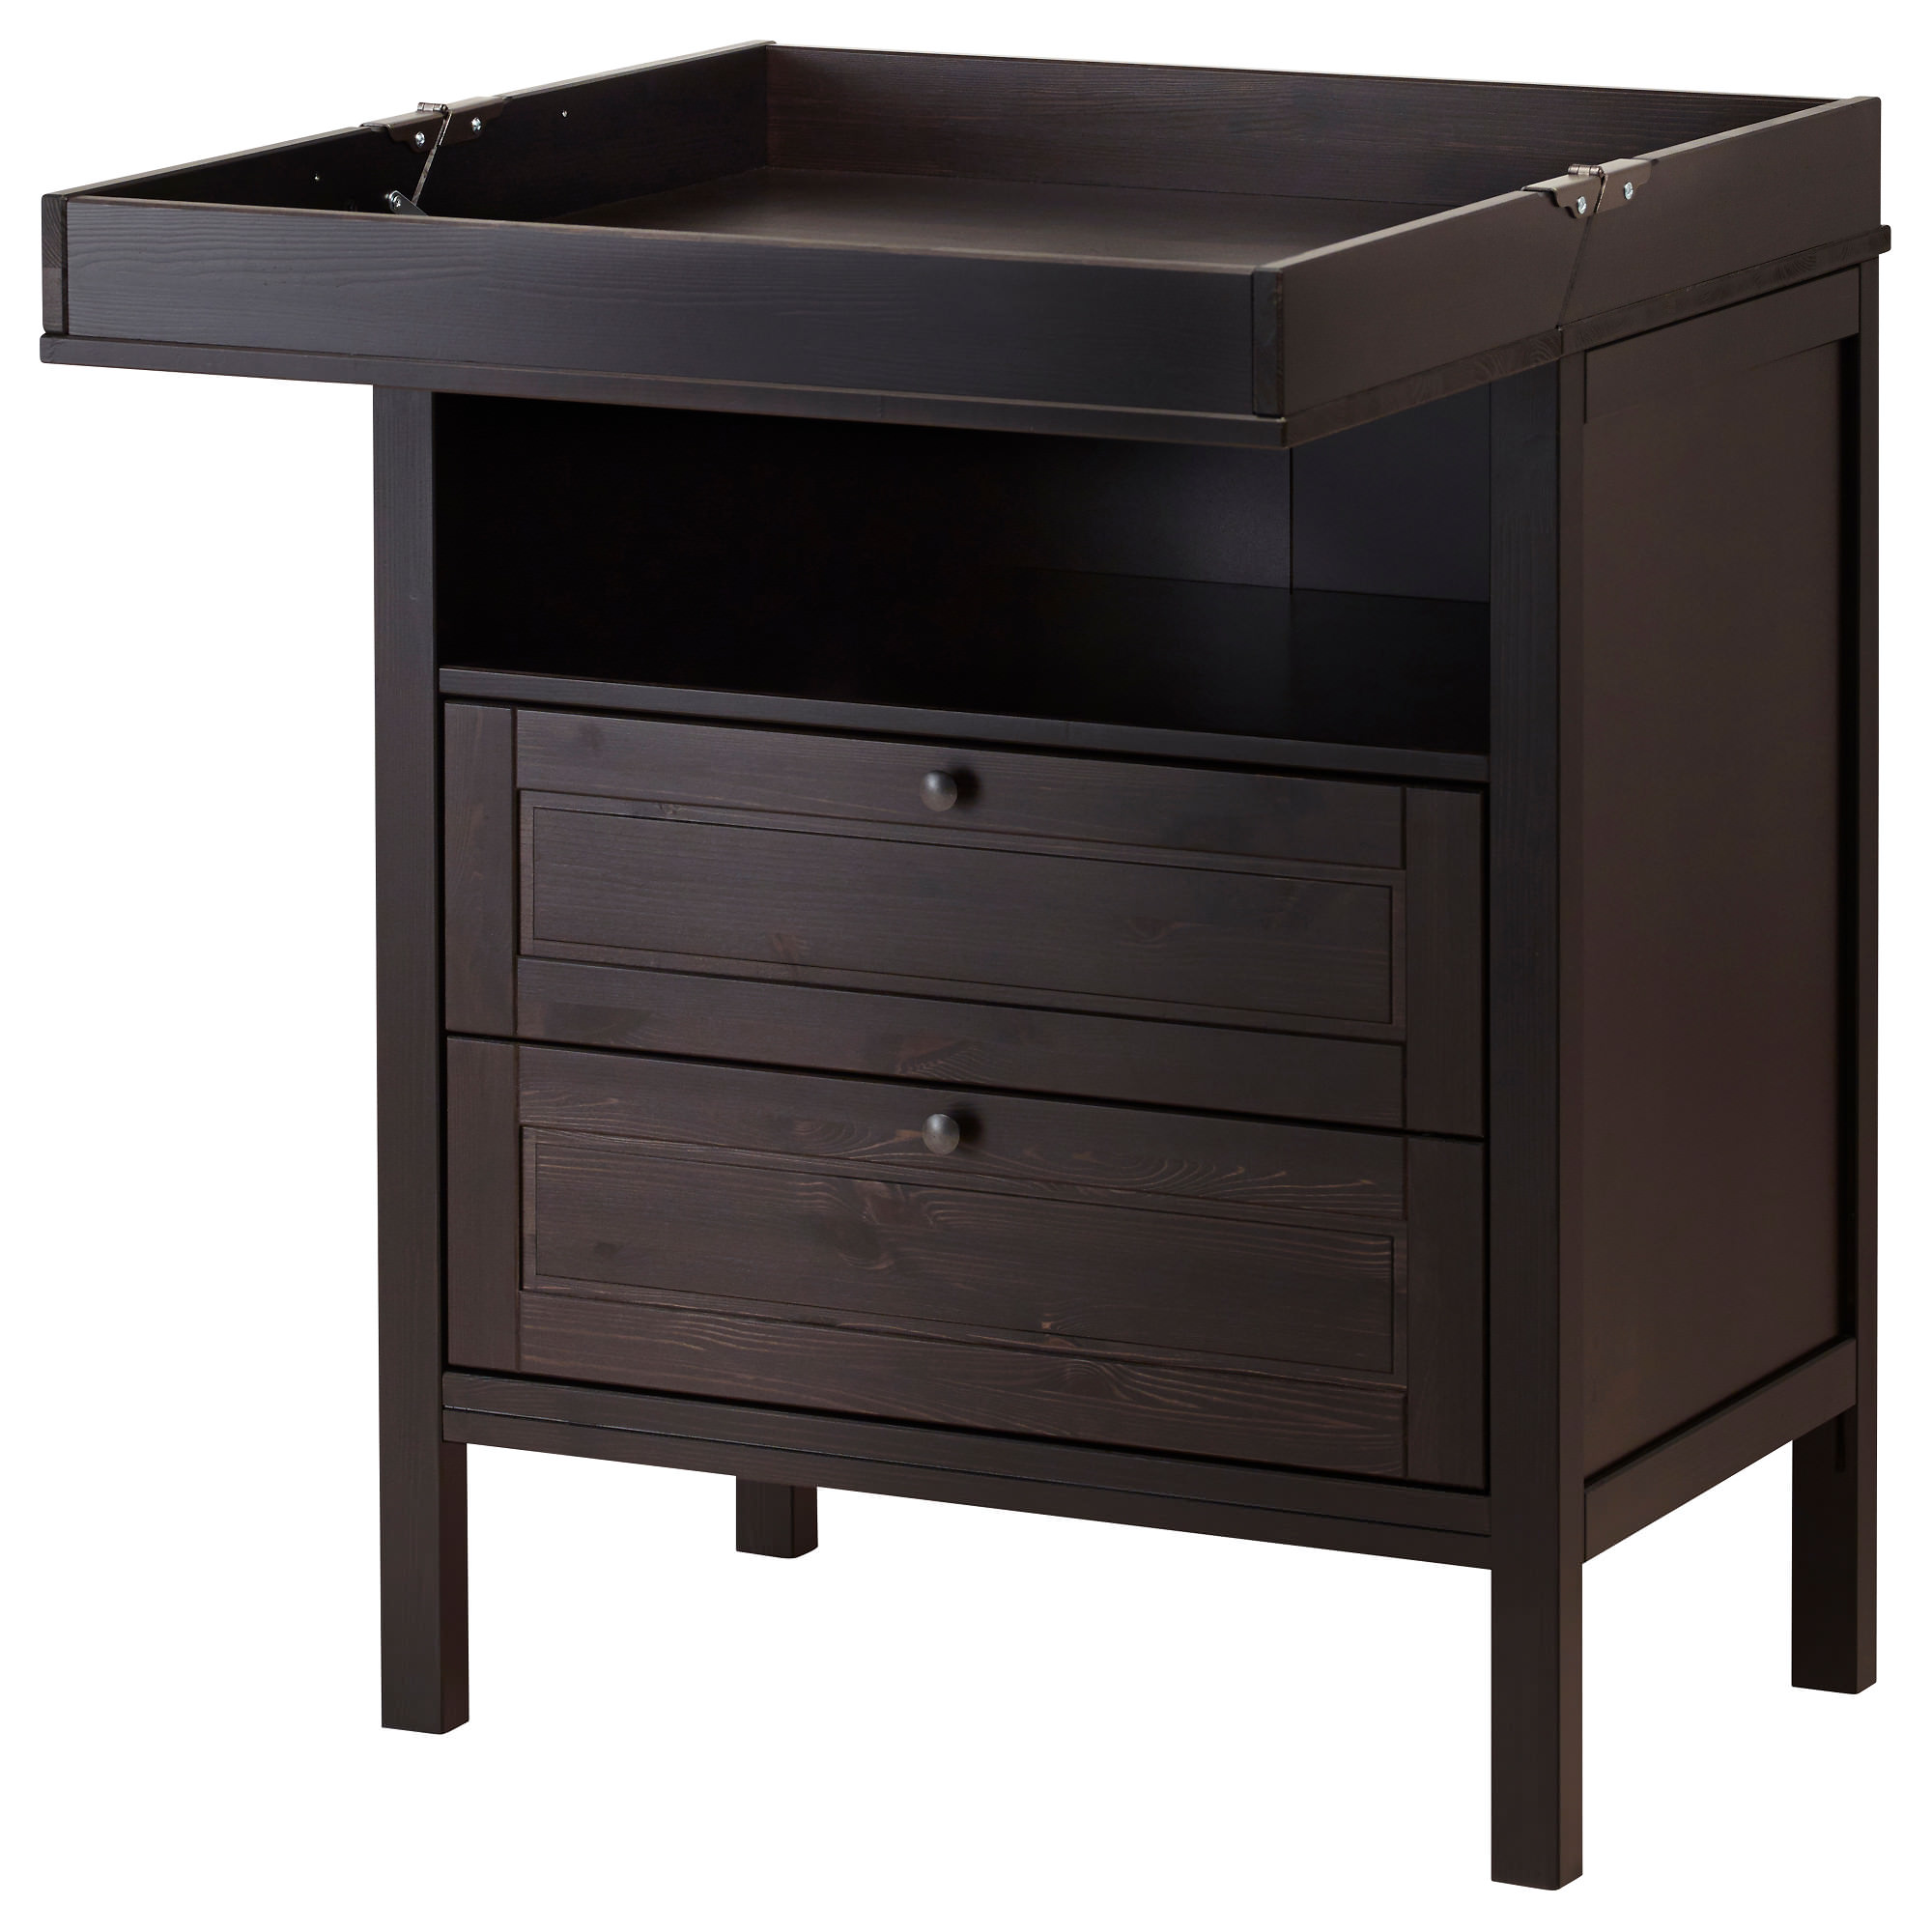 Image of: IKEA Changing Table Dresser